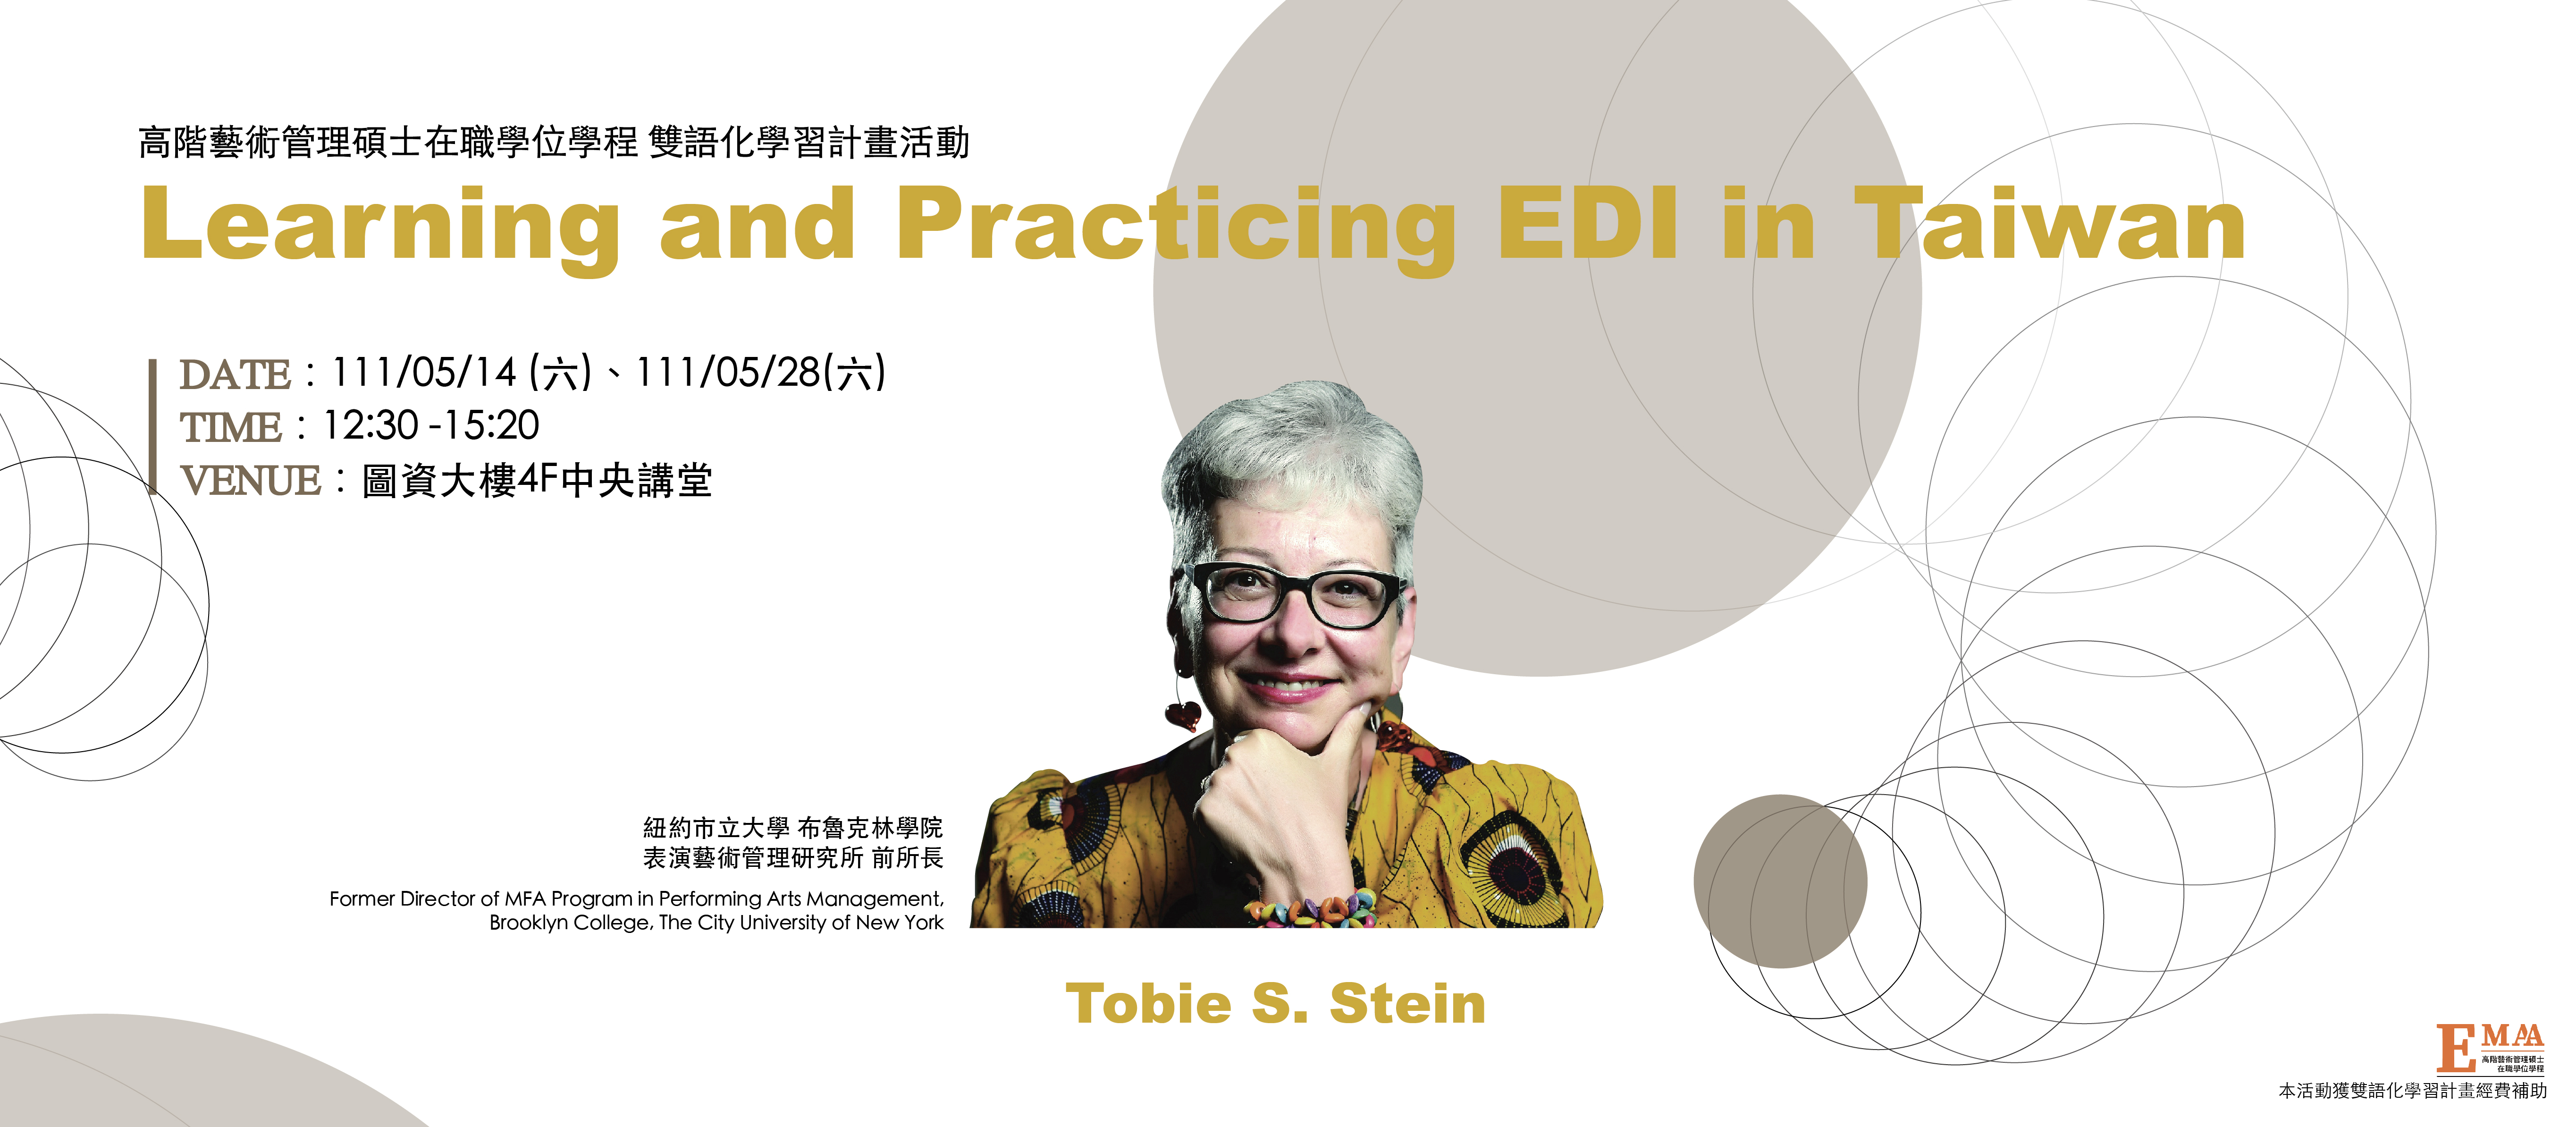 Lecture-111/05/14(六)、5/28(六) Learning and Practicing EDI in Taiwan.